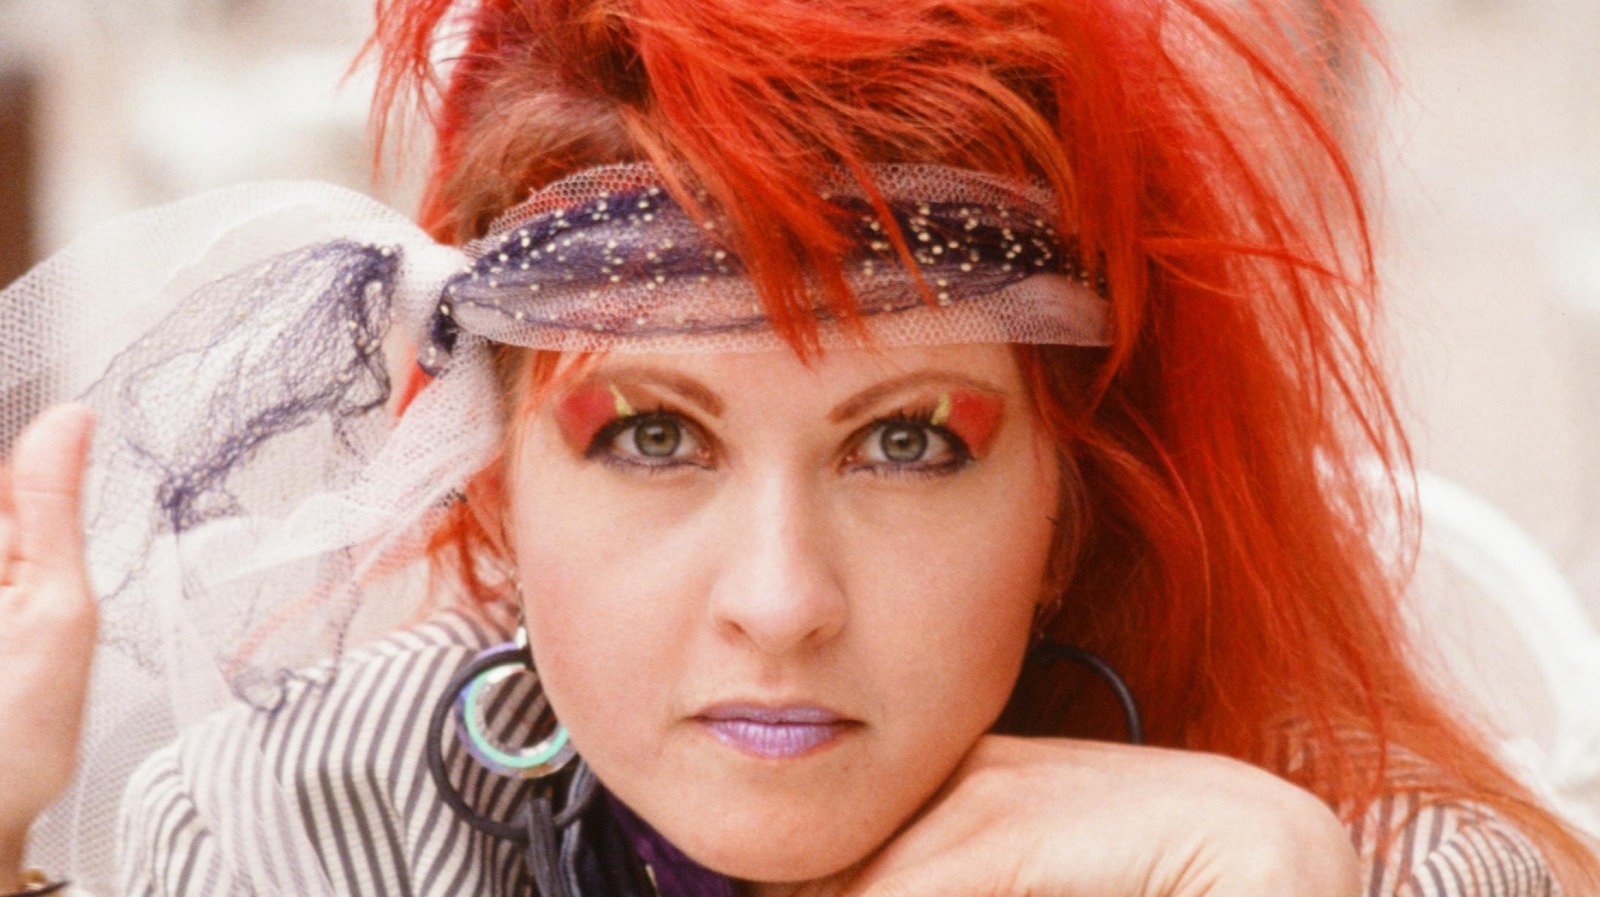 Cyndi Lauper's Blue Hair Inspires Fans to Embrace Their Uniqueness - wide 4